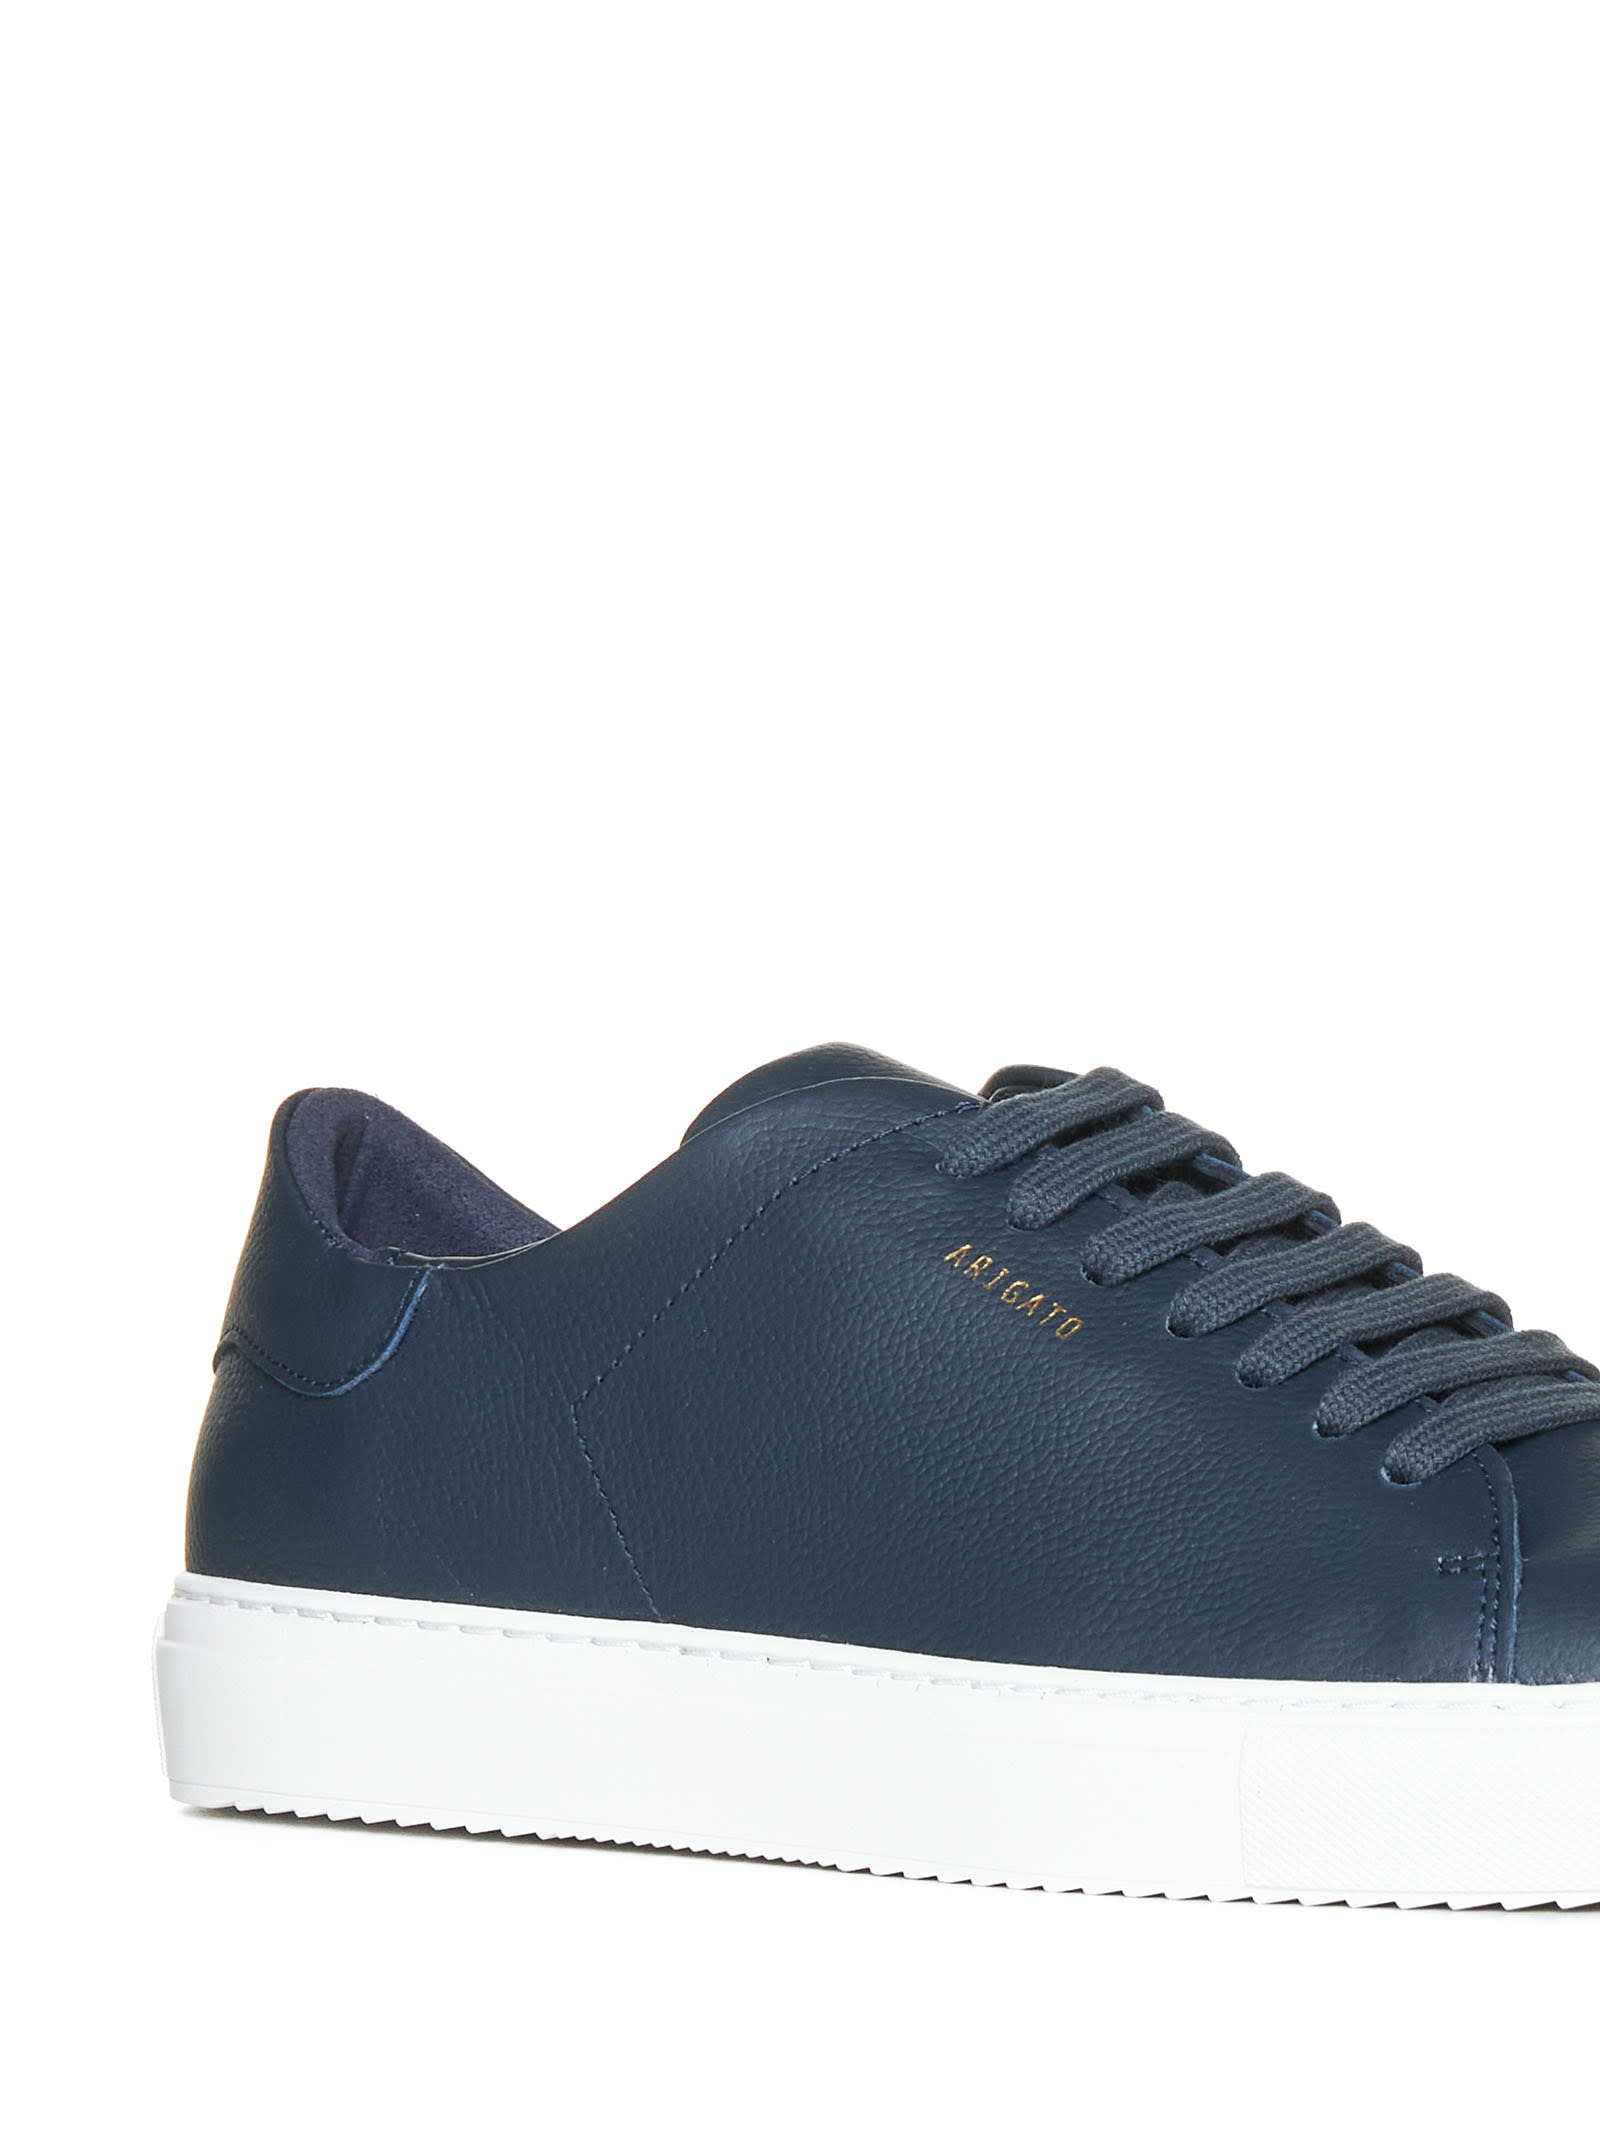 Shop Axel Arigato Sneakers In Navy / White